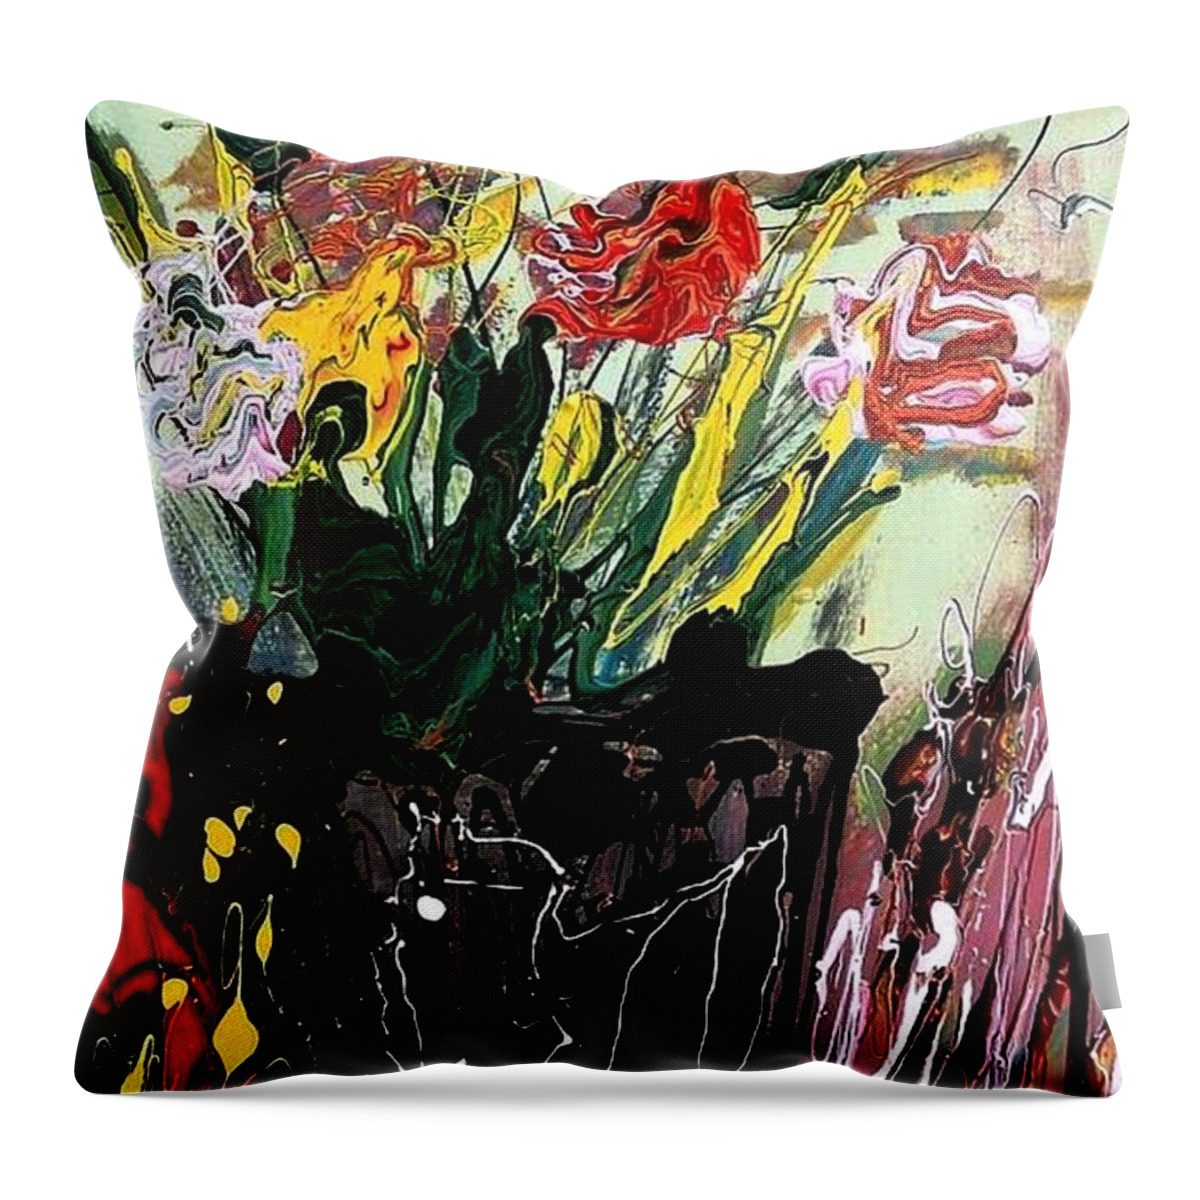 Abstract Still Life - Expressive Media Acrylic On Canvas Throw Pillow featuring the painting Flowers Blossom by Rebecca Flores